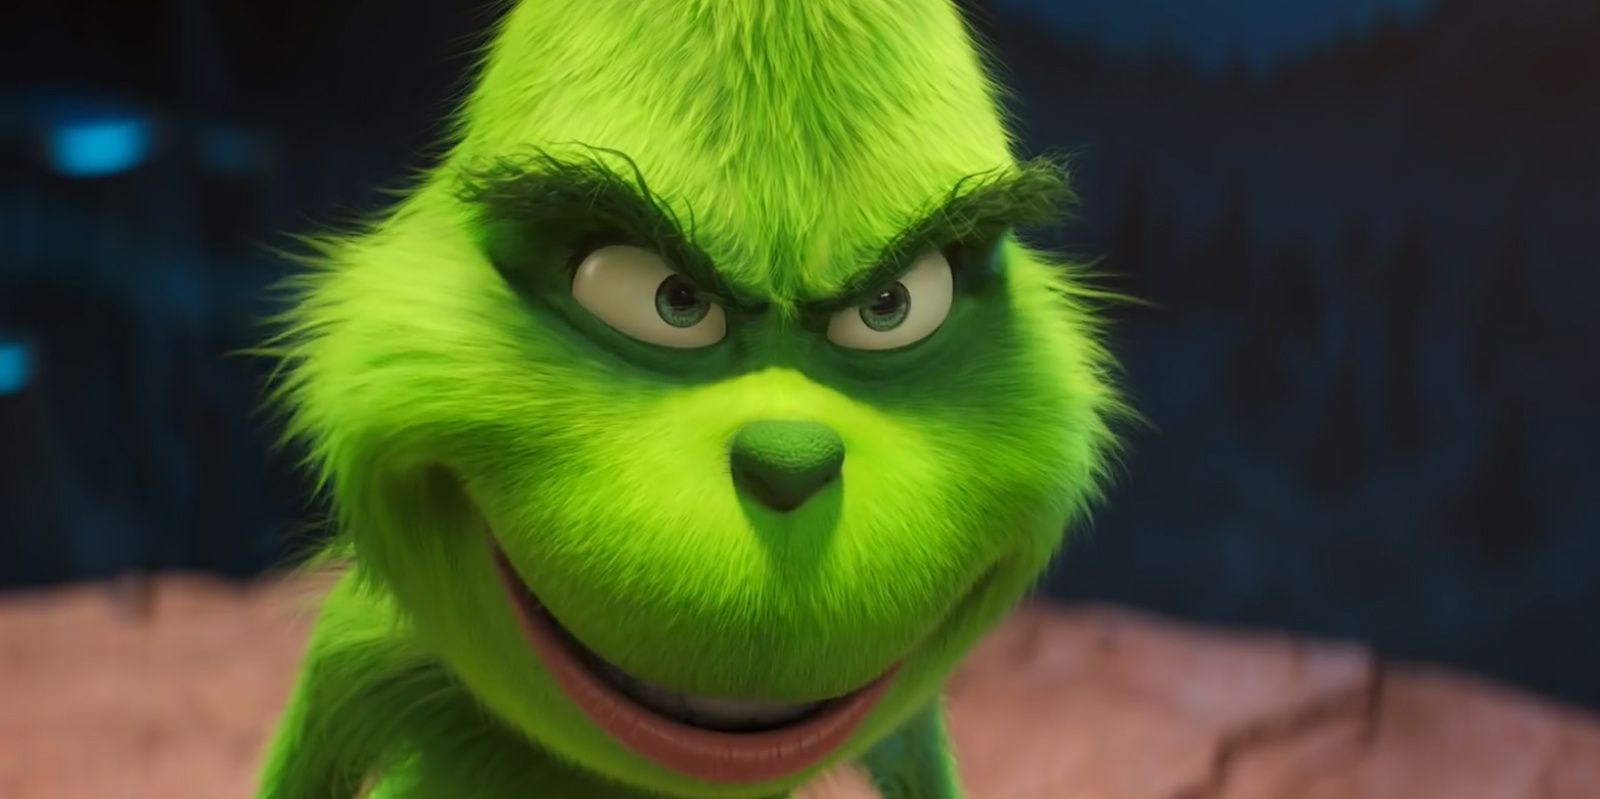 WATCH The Grinch Finally Steals Christmas in New Trailer CBR